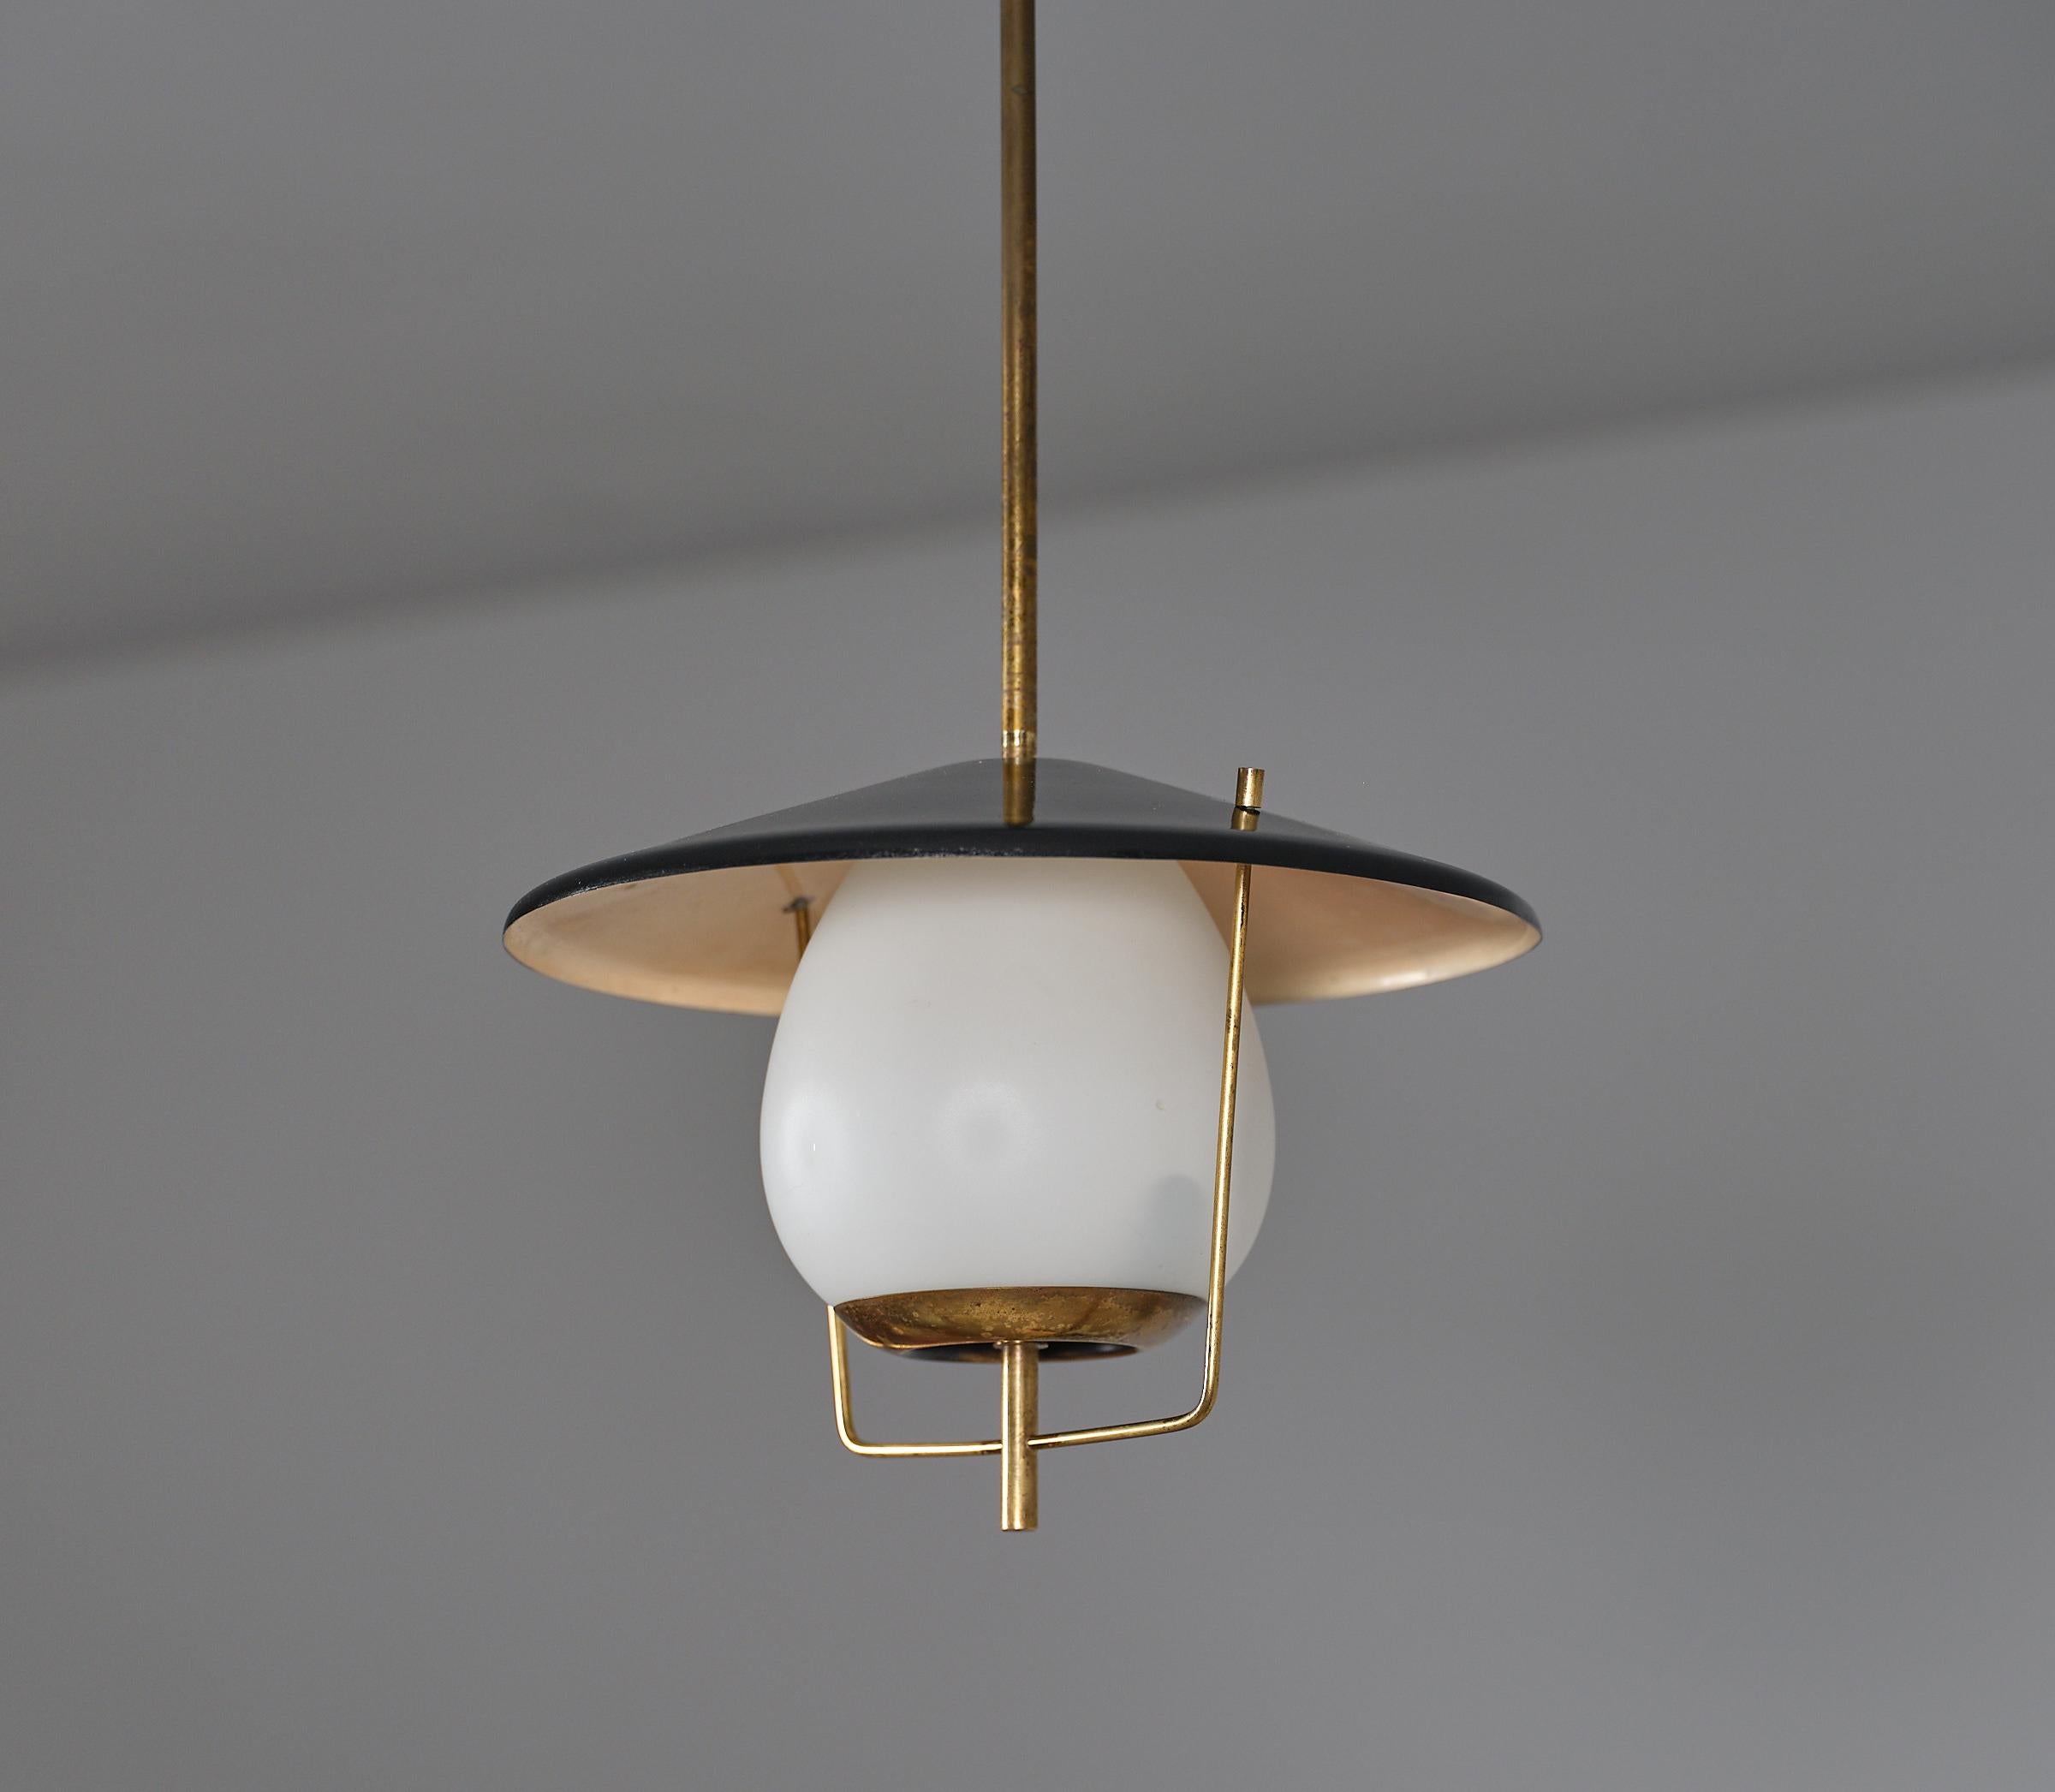 This pendant lamp, showcasing iconic Italian design from the 1950s, is attributed to the renowned STILNOVO. Crafted with meticulous attention to detail, the lamp features a brass construction with a newly applied black lacquer finish, rejuvenating